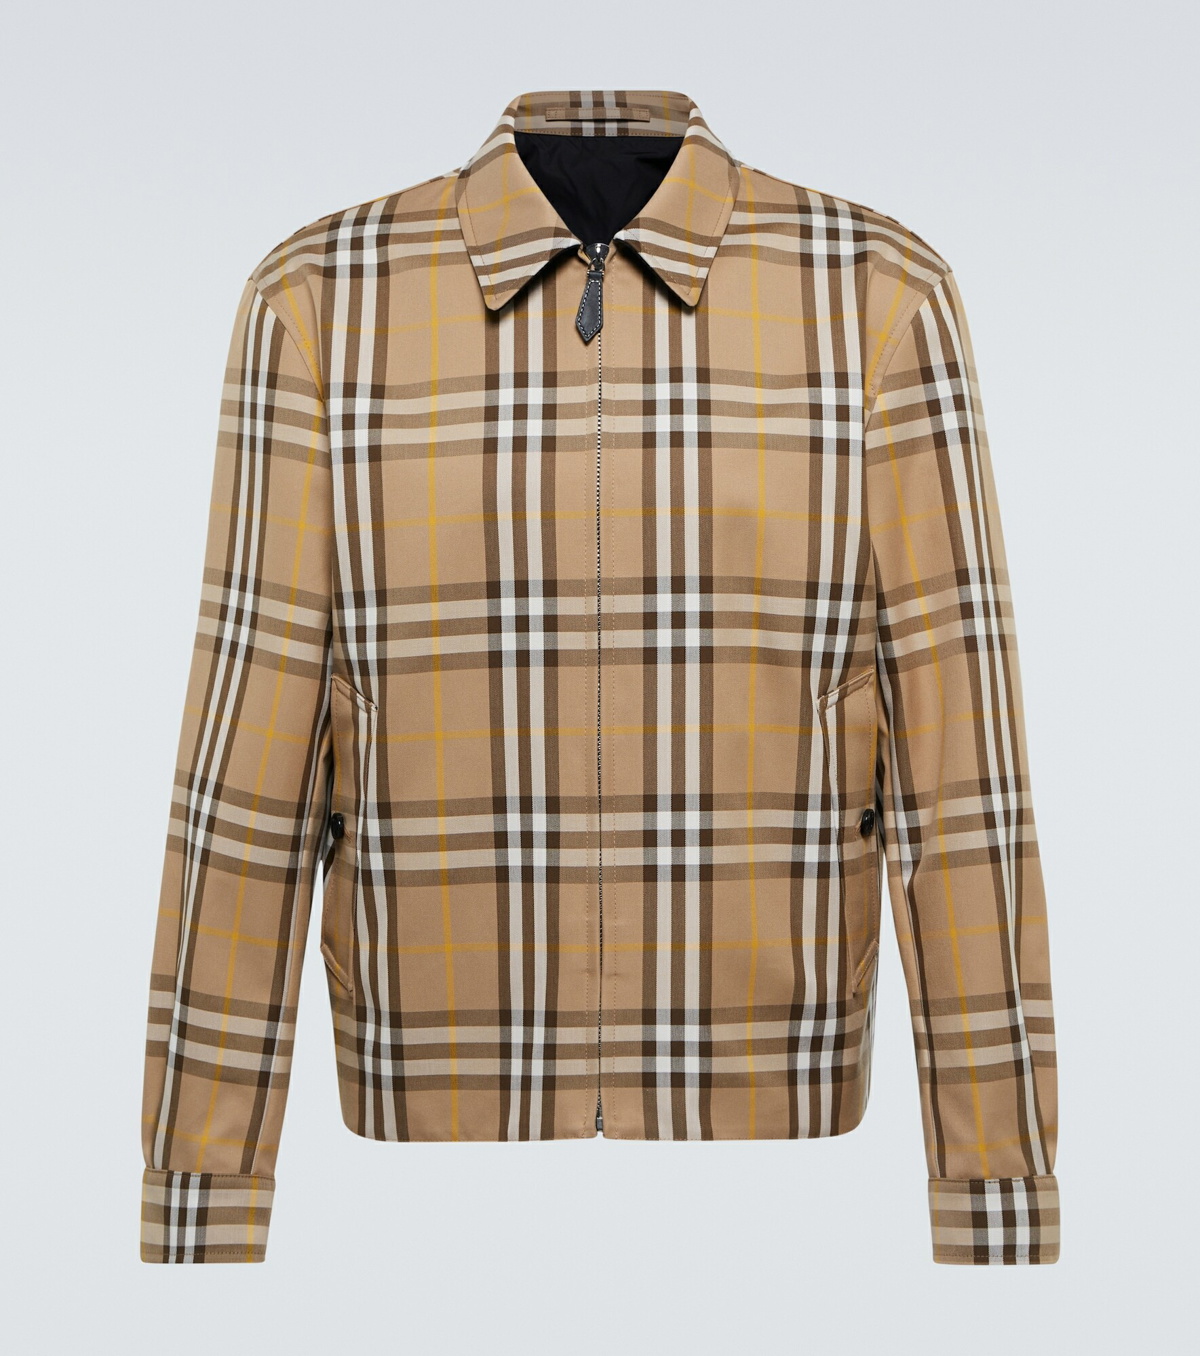 Burberry - Reversible checked cotton jacket Burberry